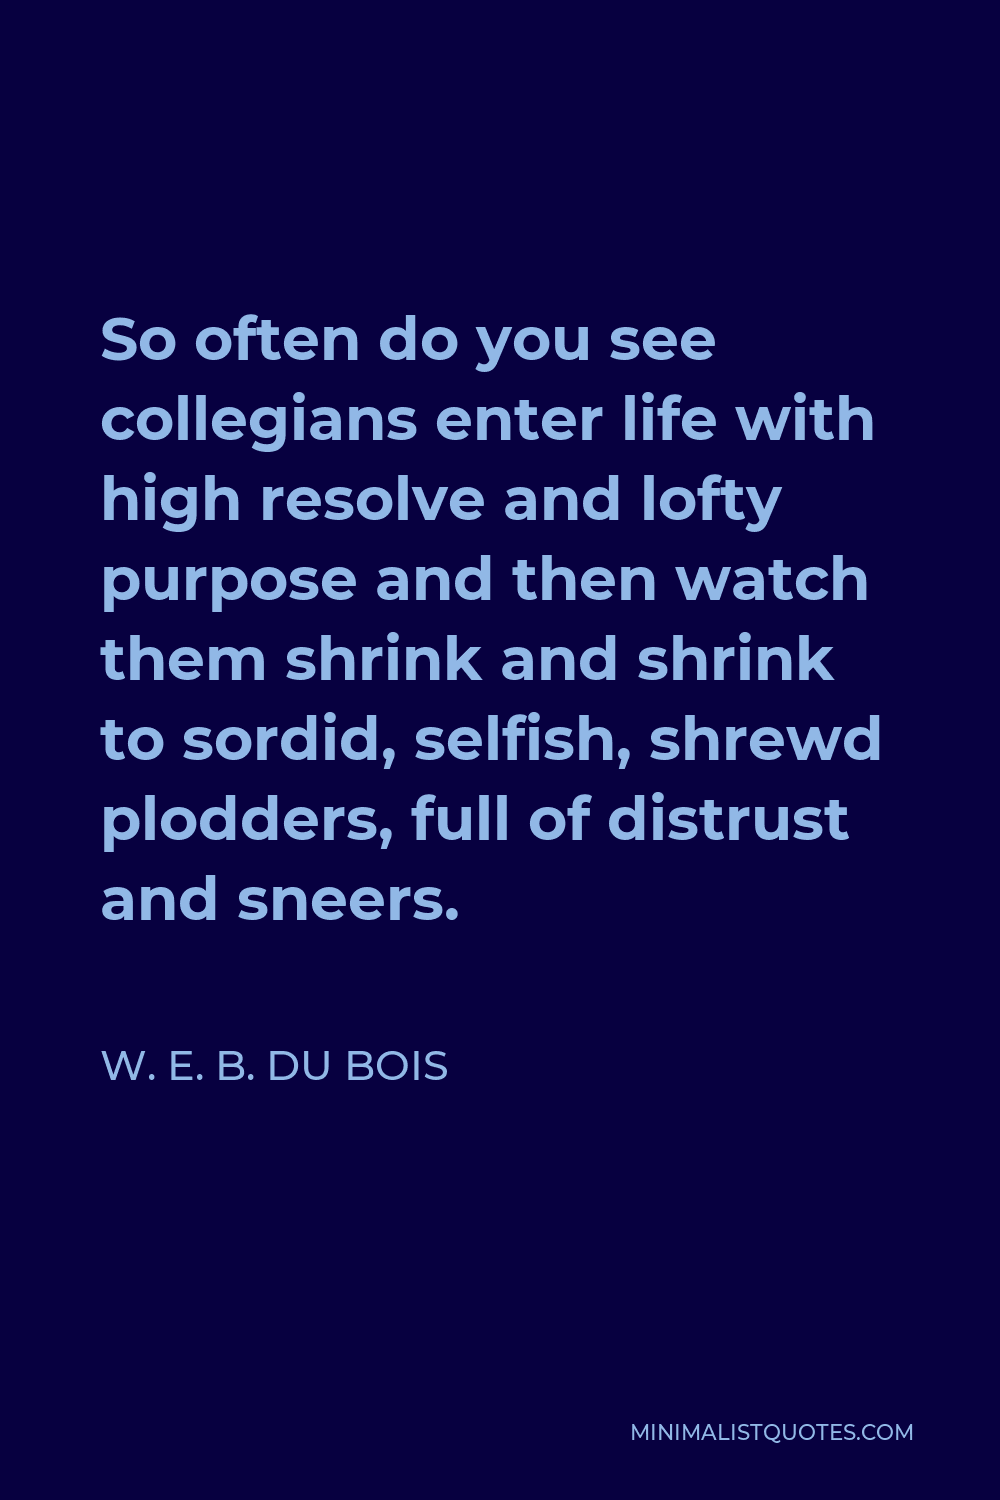 W. E. B. Du Bois Quote - So often do you see collegians enter life with high resolve and lofty purpose and then watch them shrink and shrink to sordid, selfish, shrewd plodders, full of distrust and sneers.